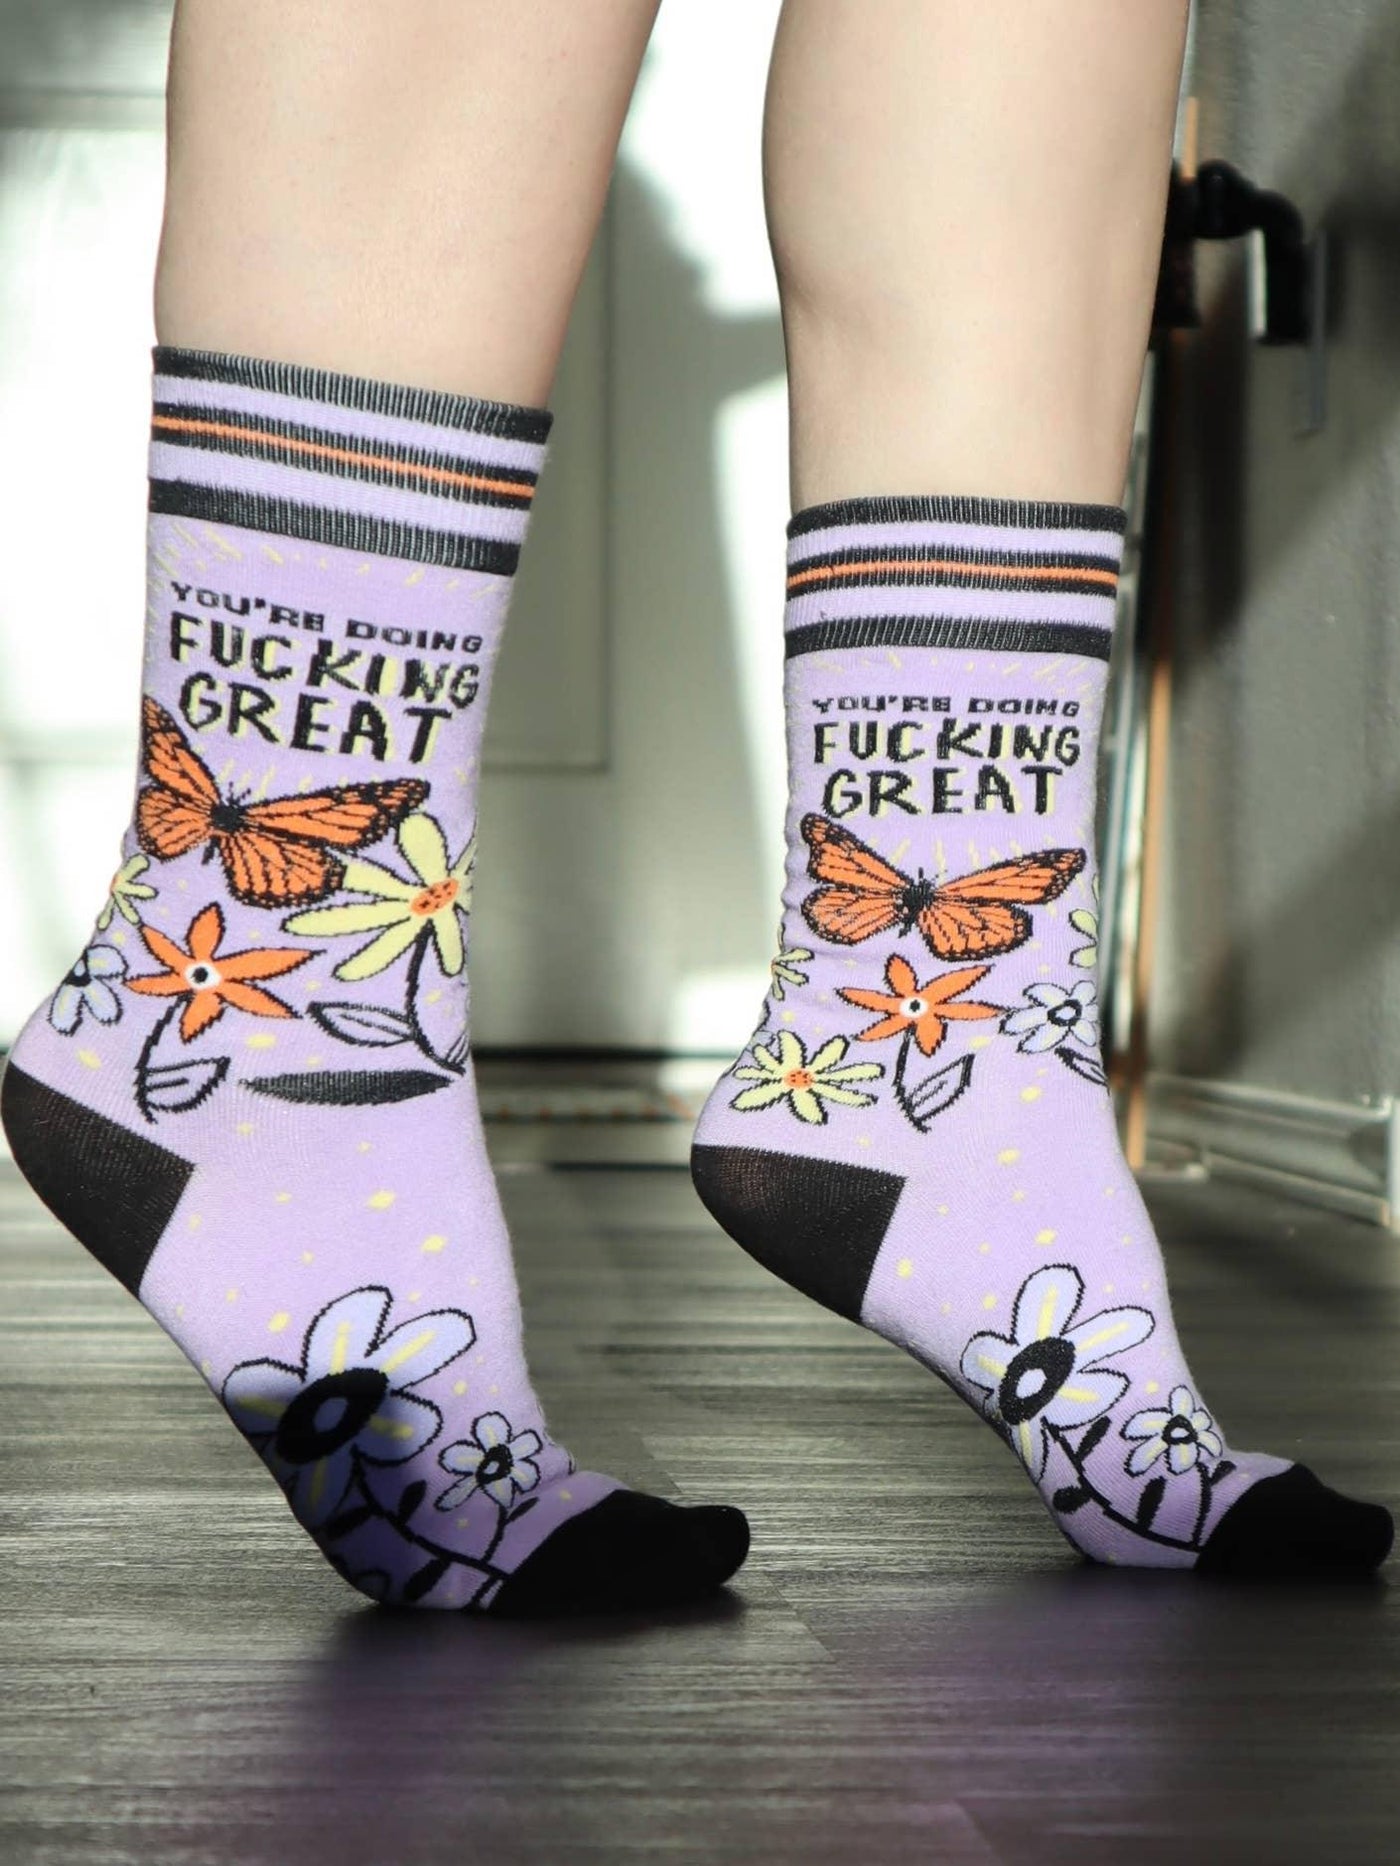 You’re Doing Fucking Great, Womens Crew - Groovy Things - The Sock Monster